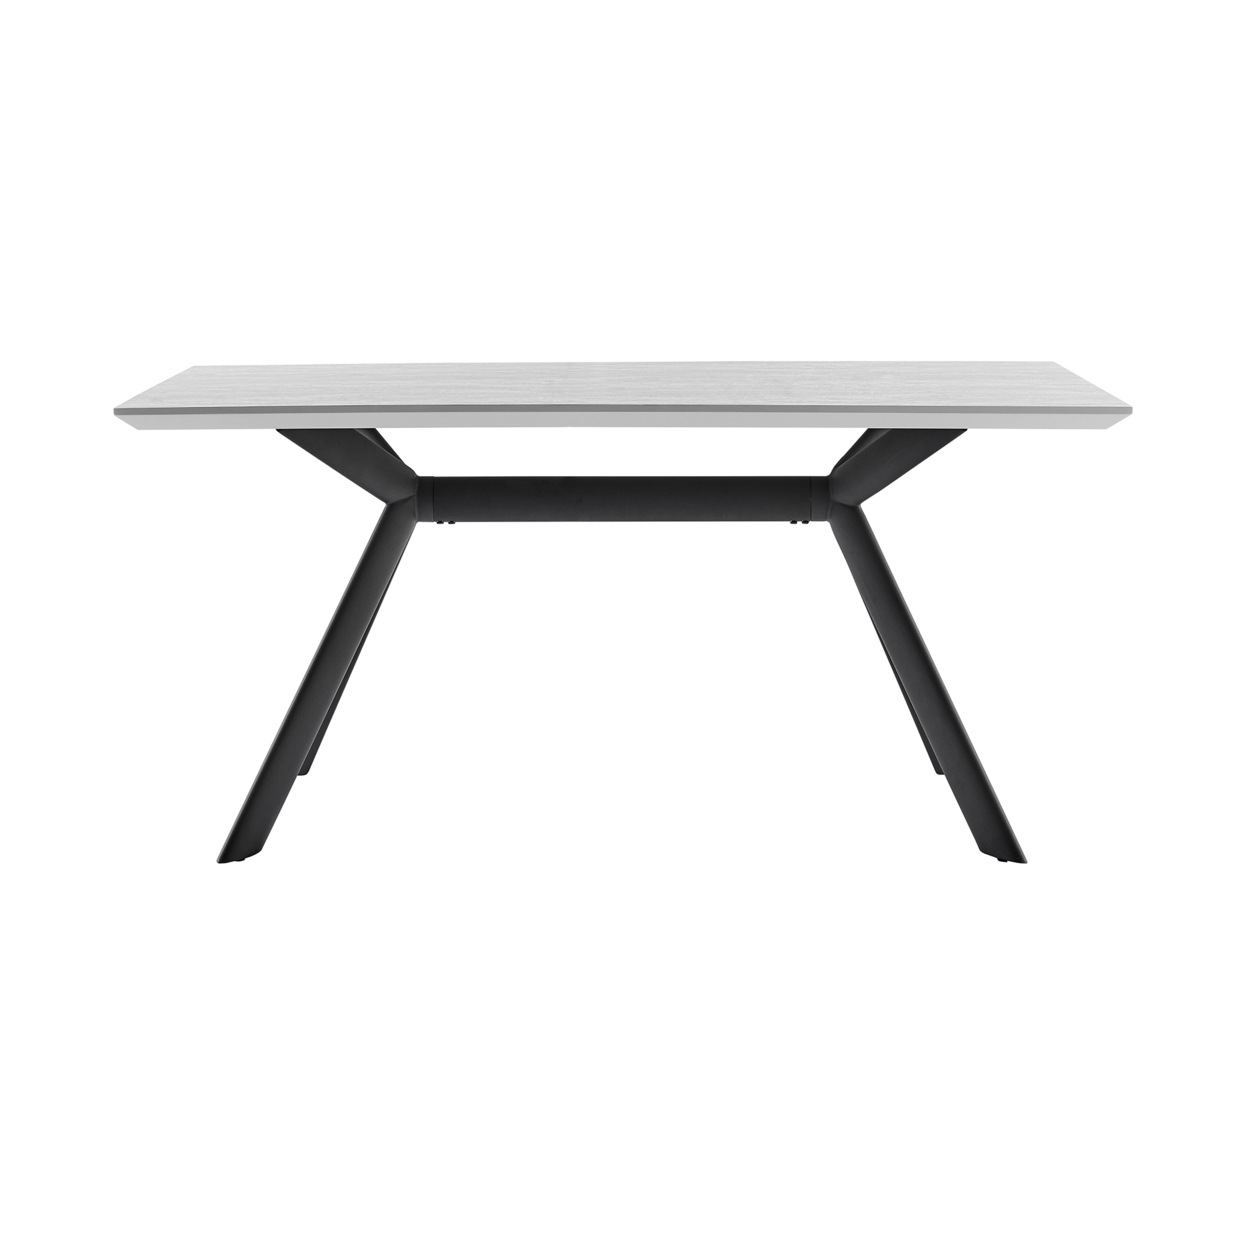 Dining Table With Melamine Top And Angled Metal Base, Light Gray And Black- Saltoro Sherpi